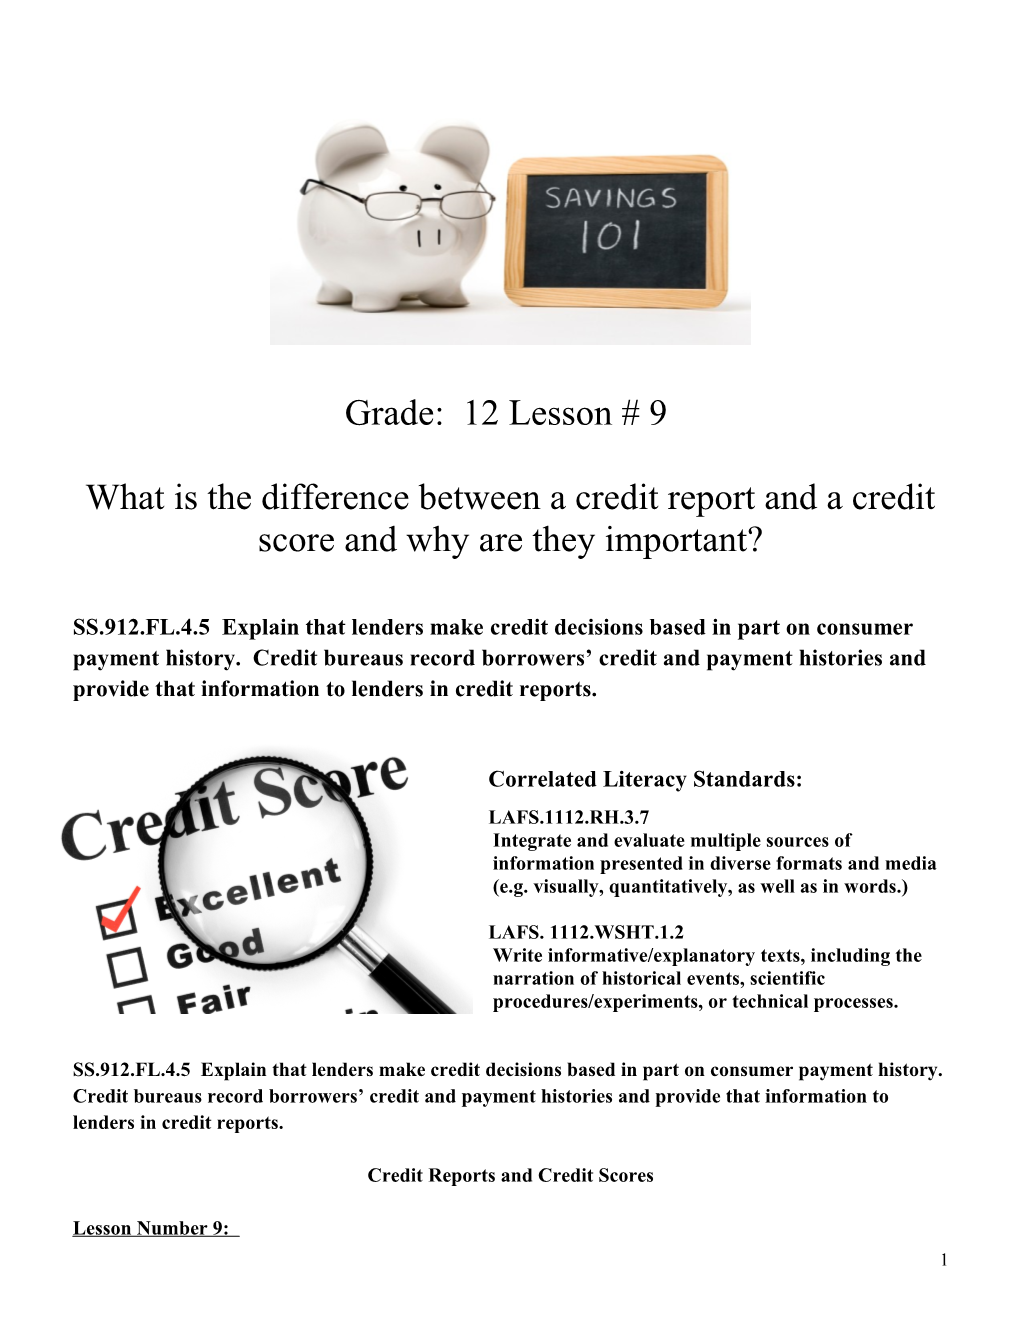 What Is the Difference Between a Credit Report and a Credit Score and Why Are They Important?